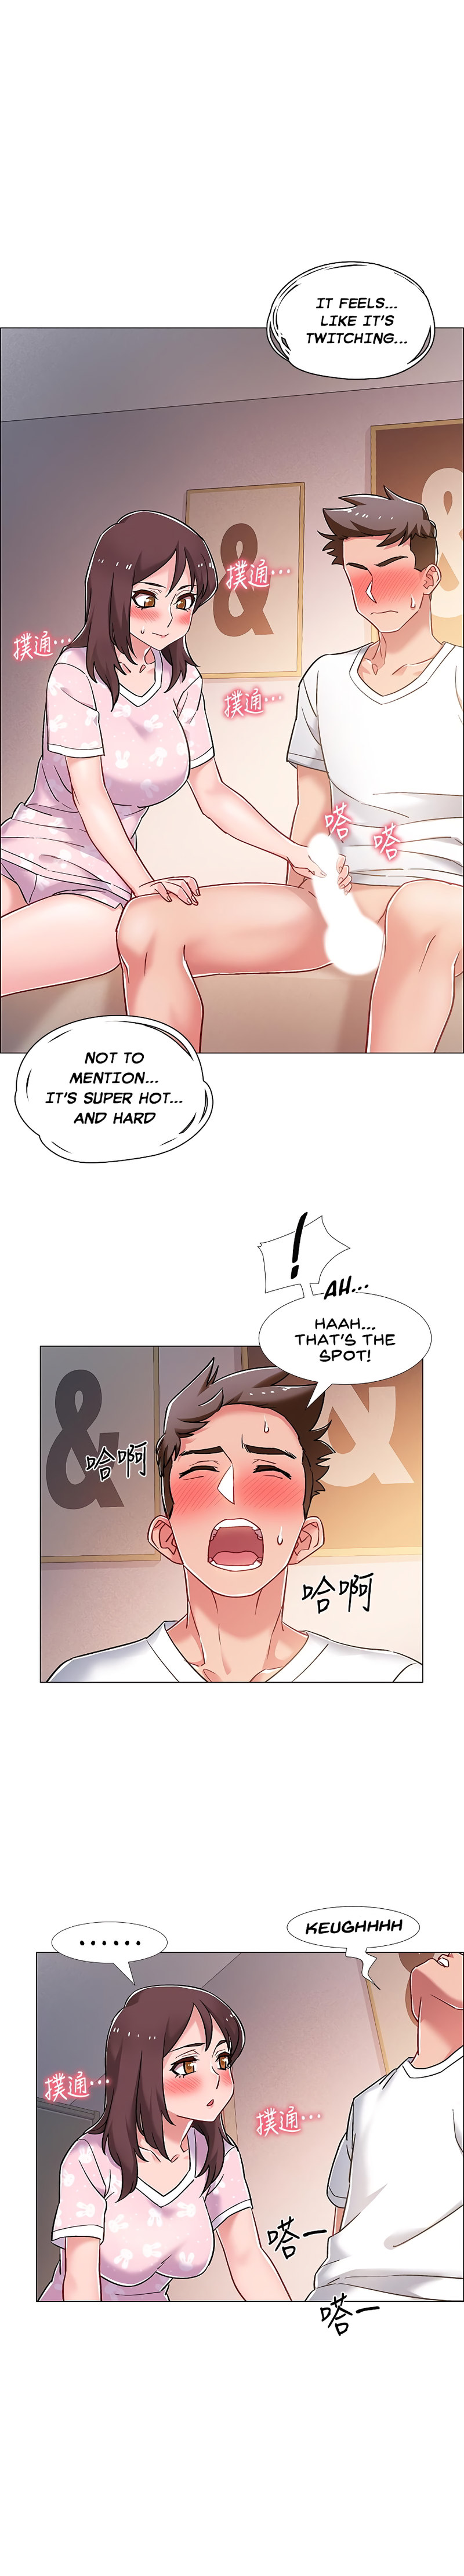 Enlistment Countdown - Chapter 13 Page 16